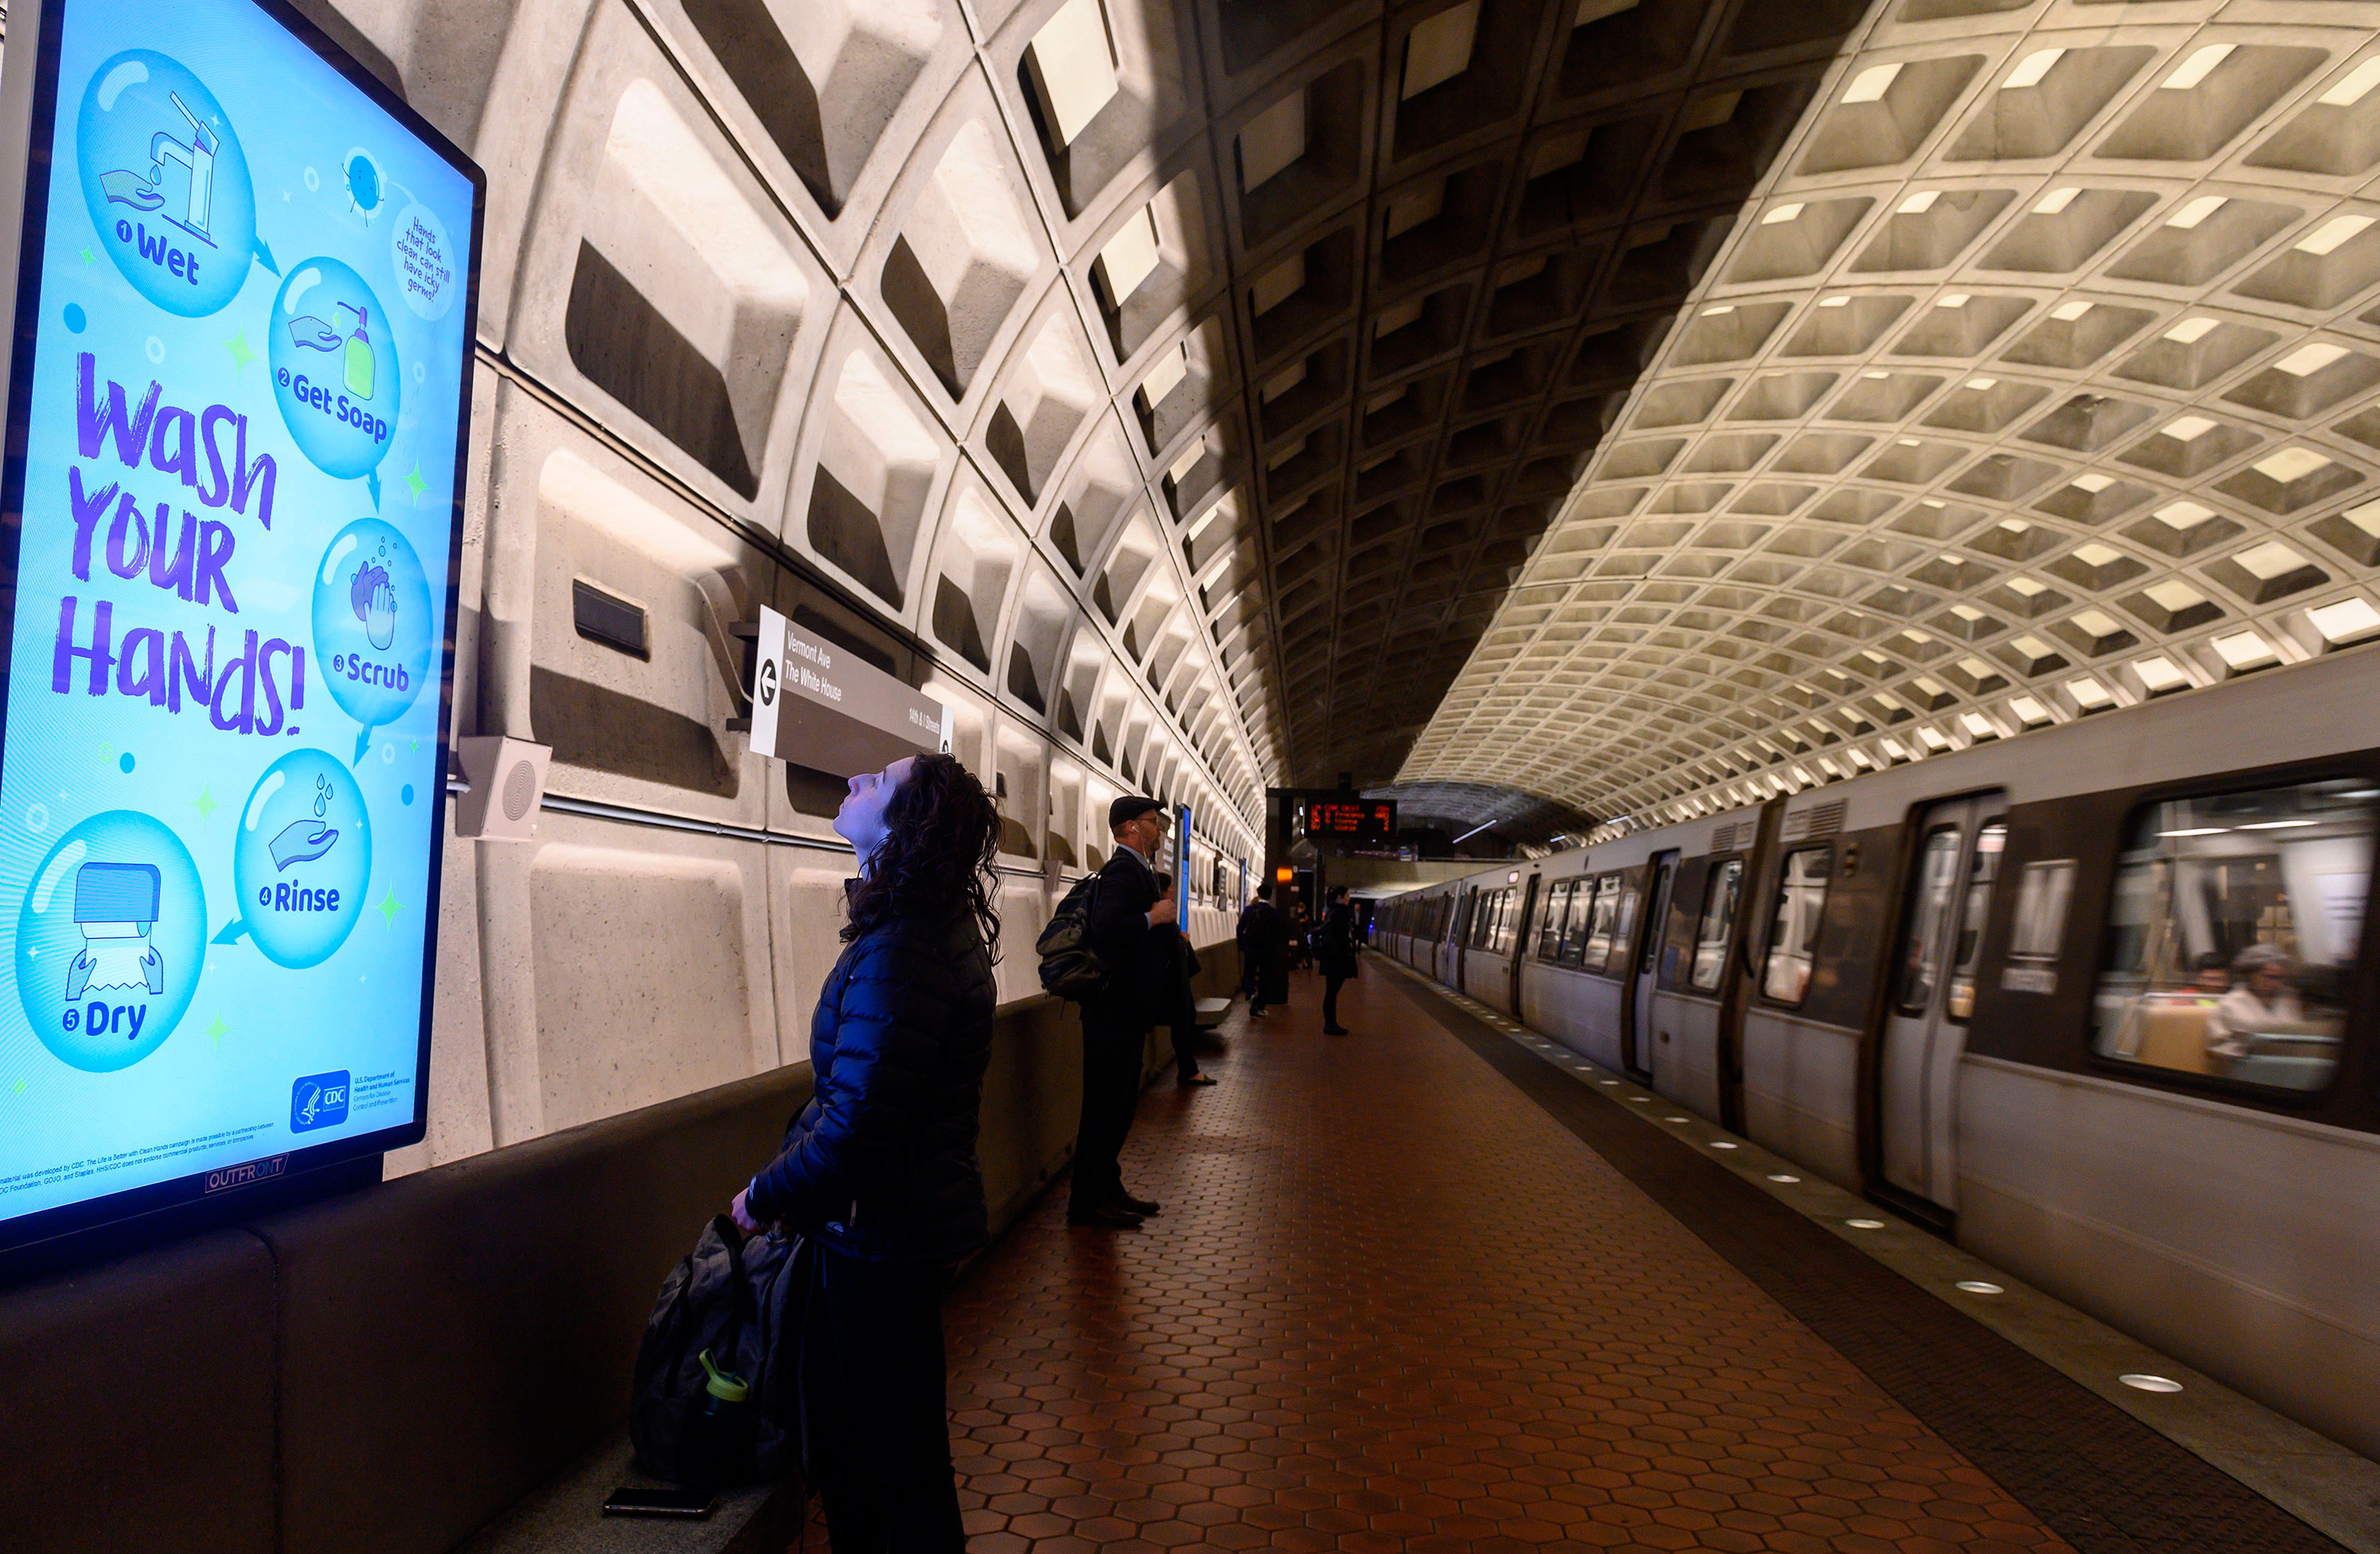 A woman reads a public awareness sign in response to the coronavirus outbreak as she waits for a train in the DC Metro on March 10. 